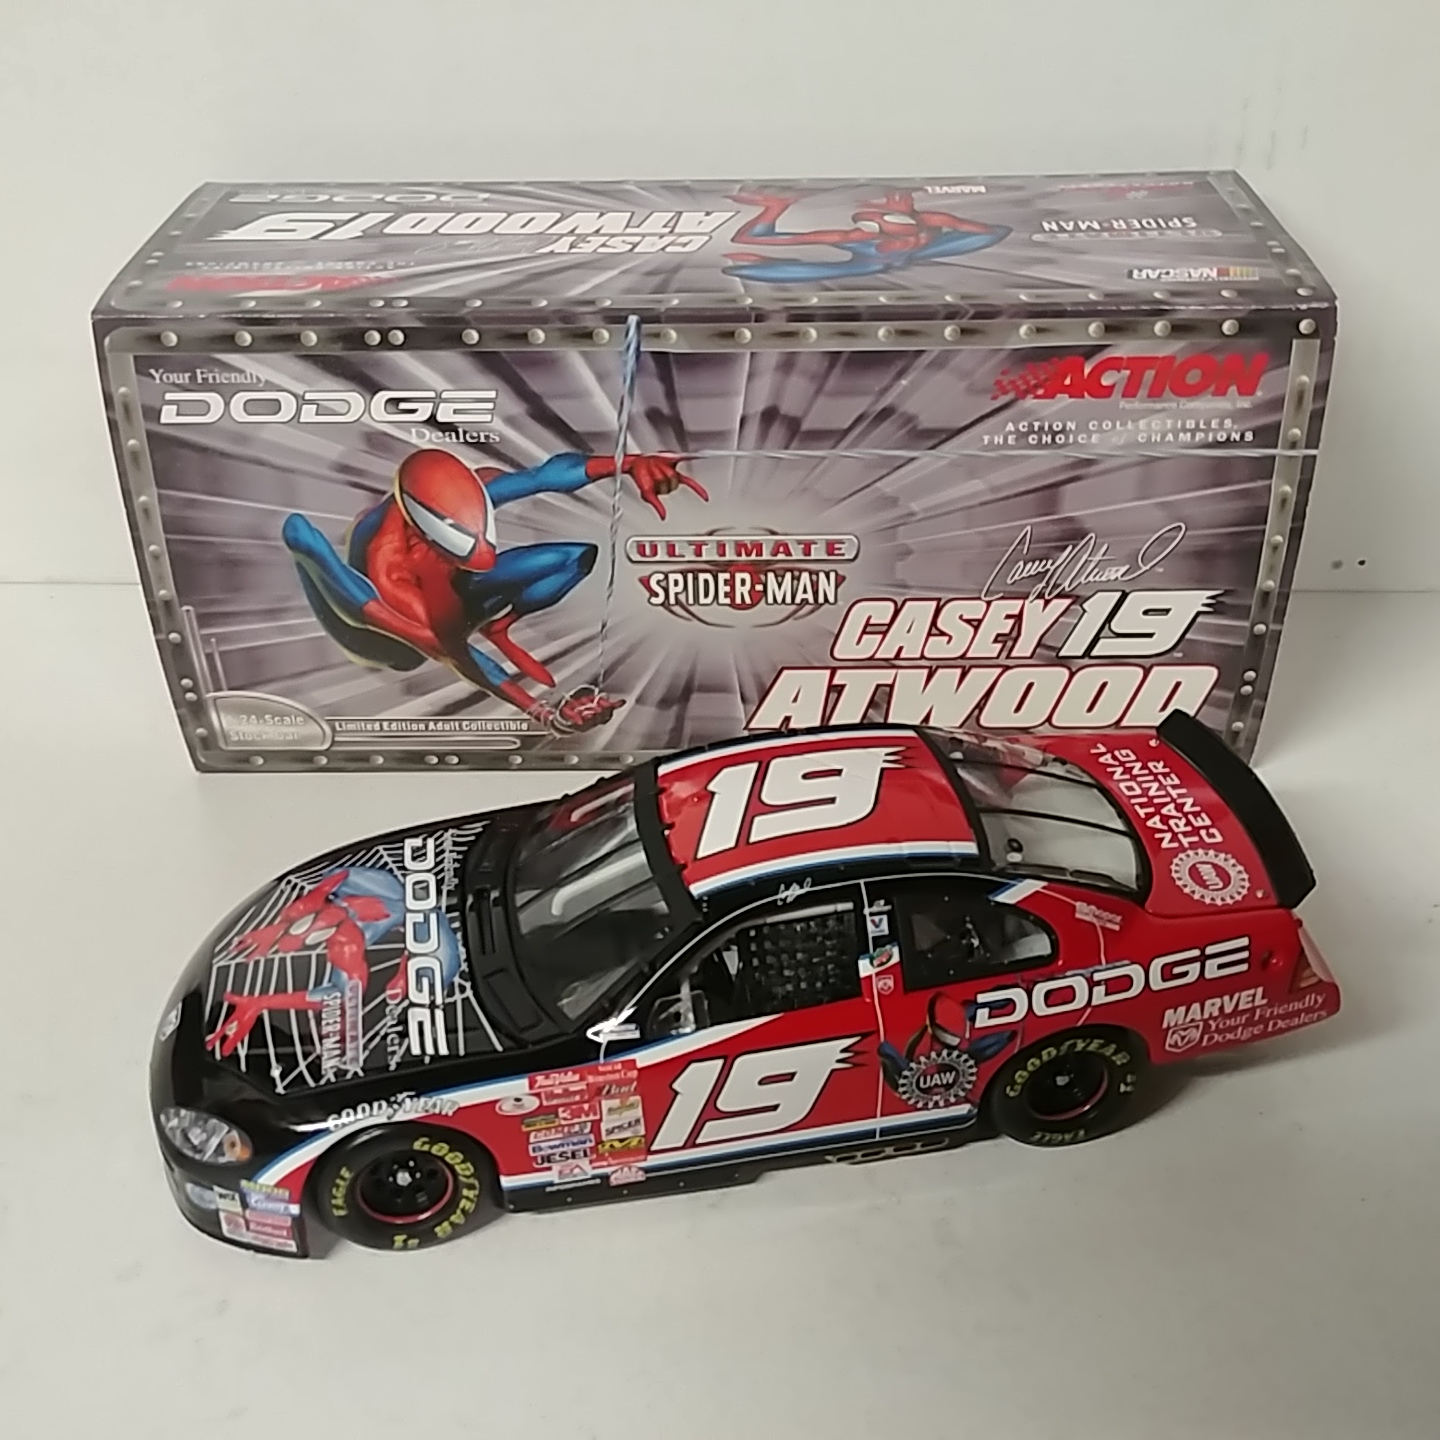 2001 Casey Atwood 1/24th Dodge Dealers "Spiderman" c/w car